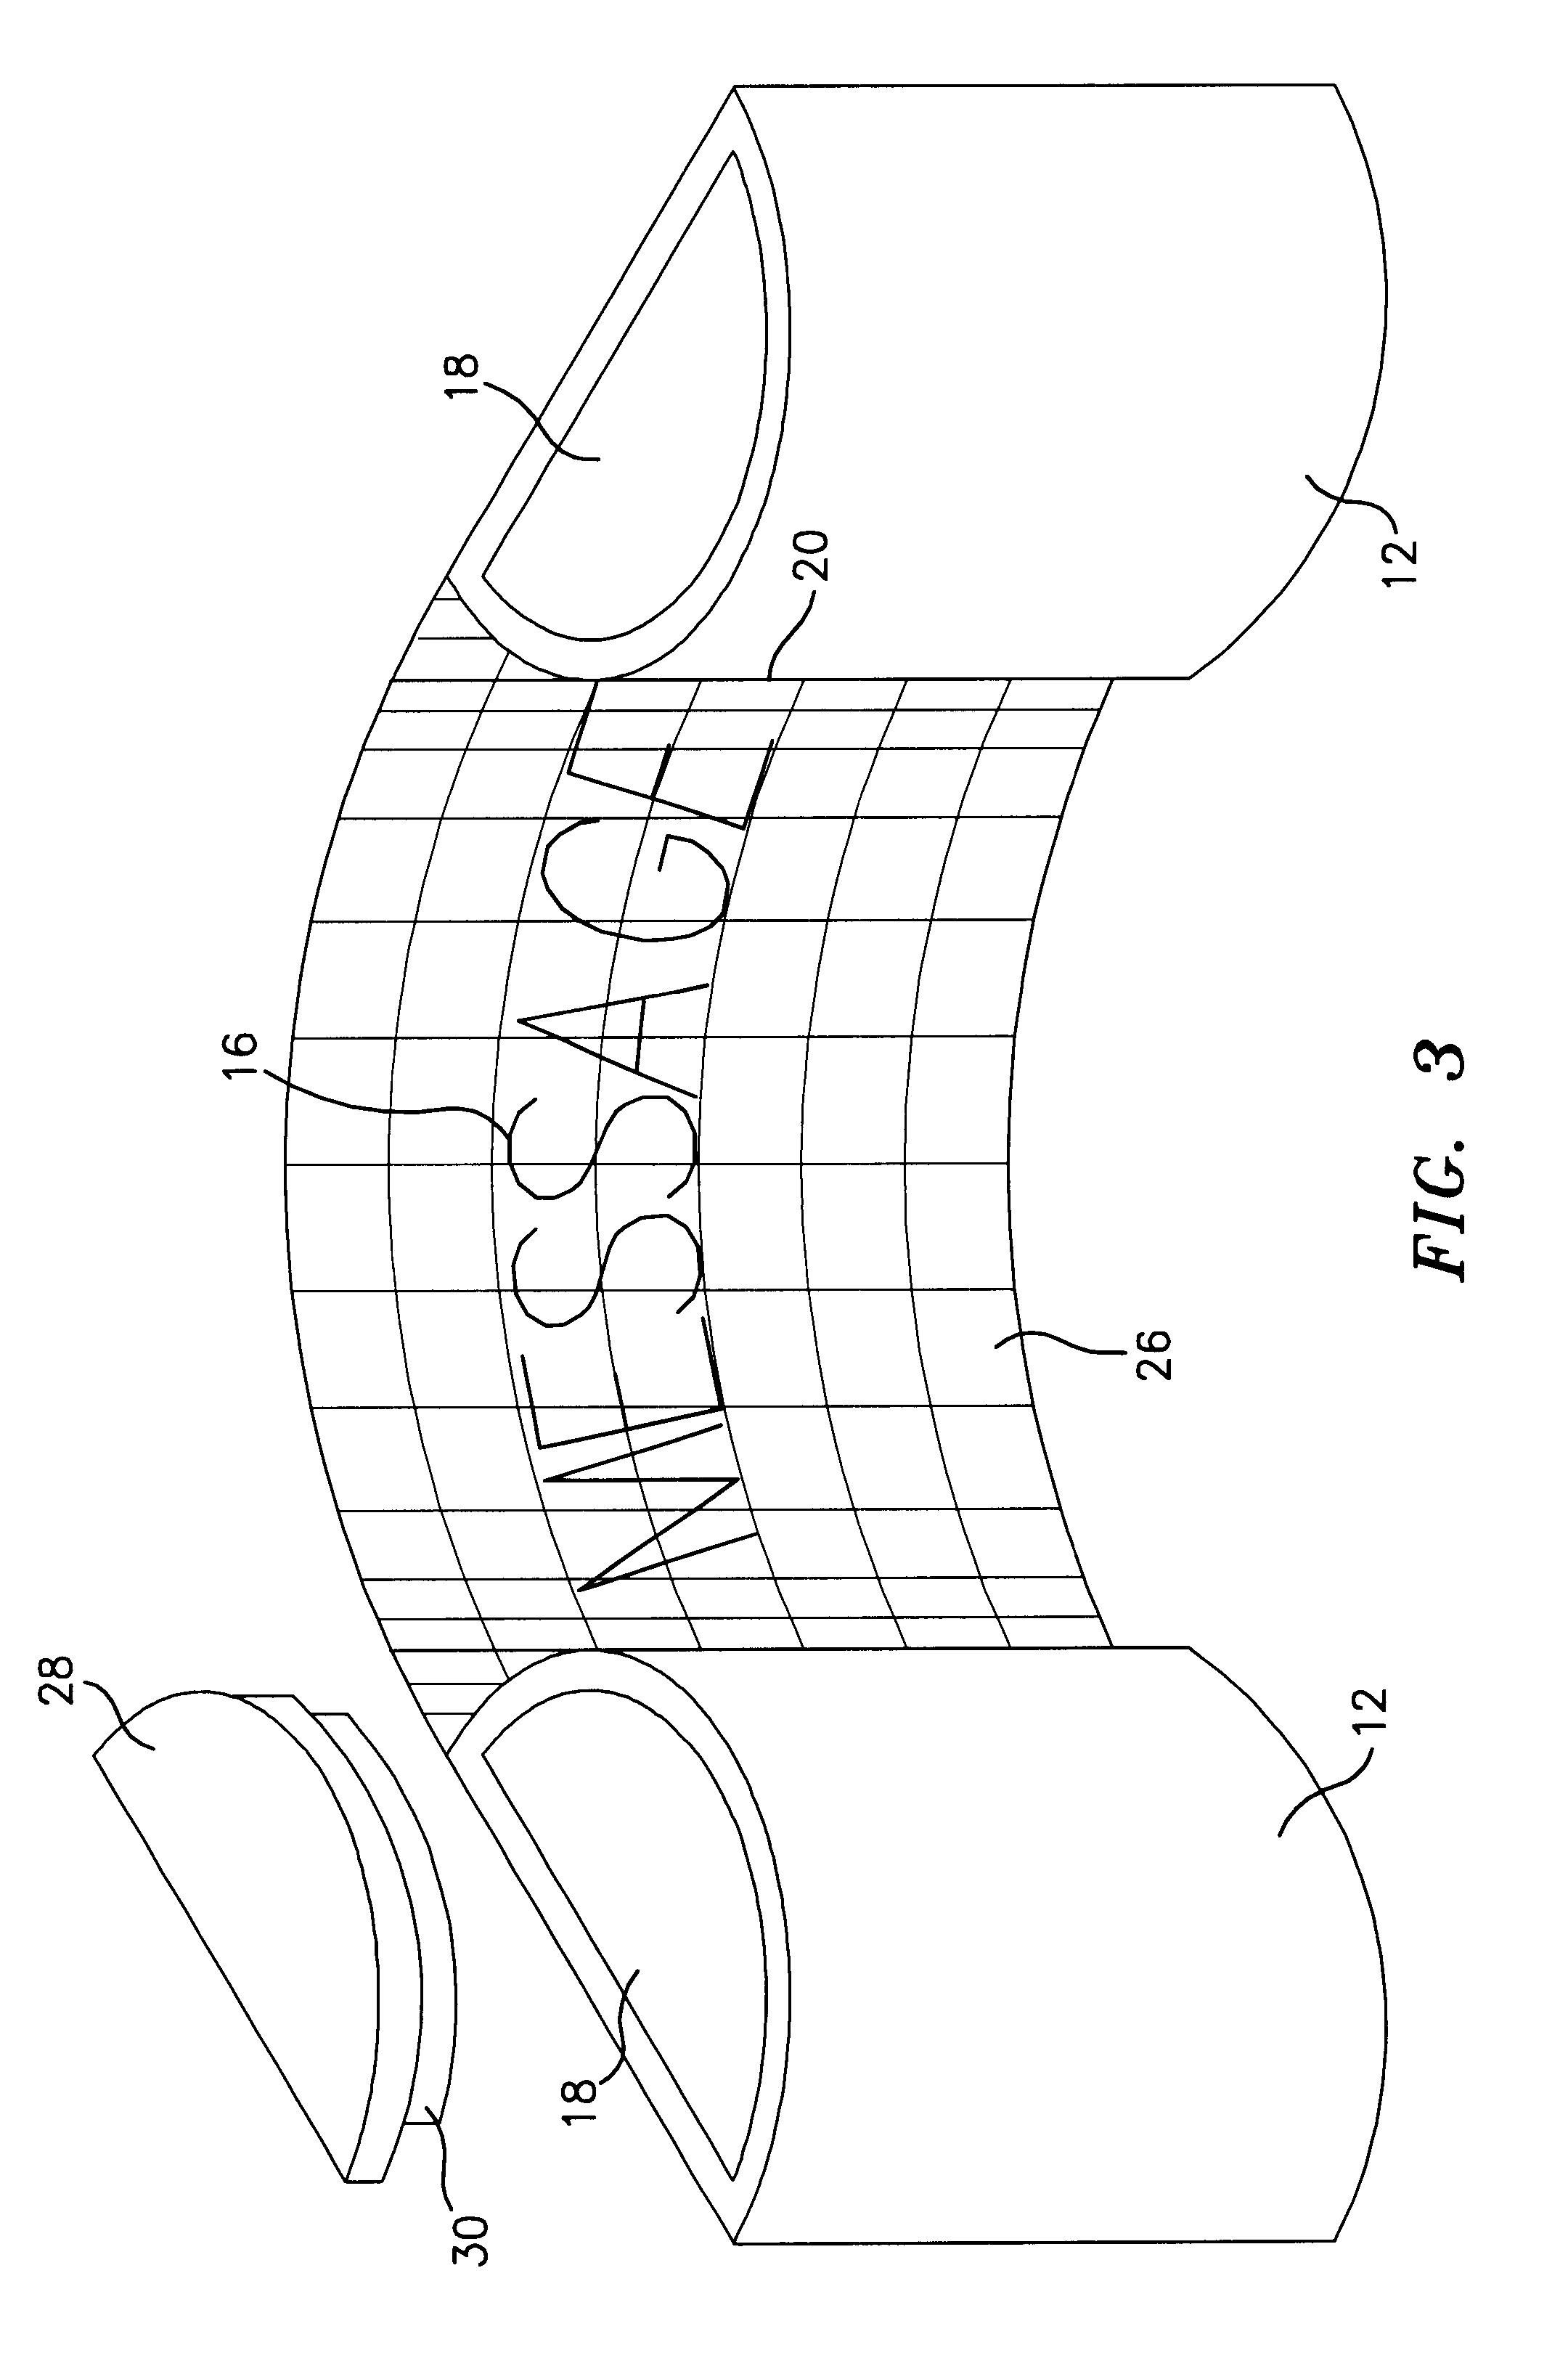 Foldable container having flat profile